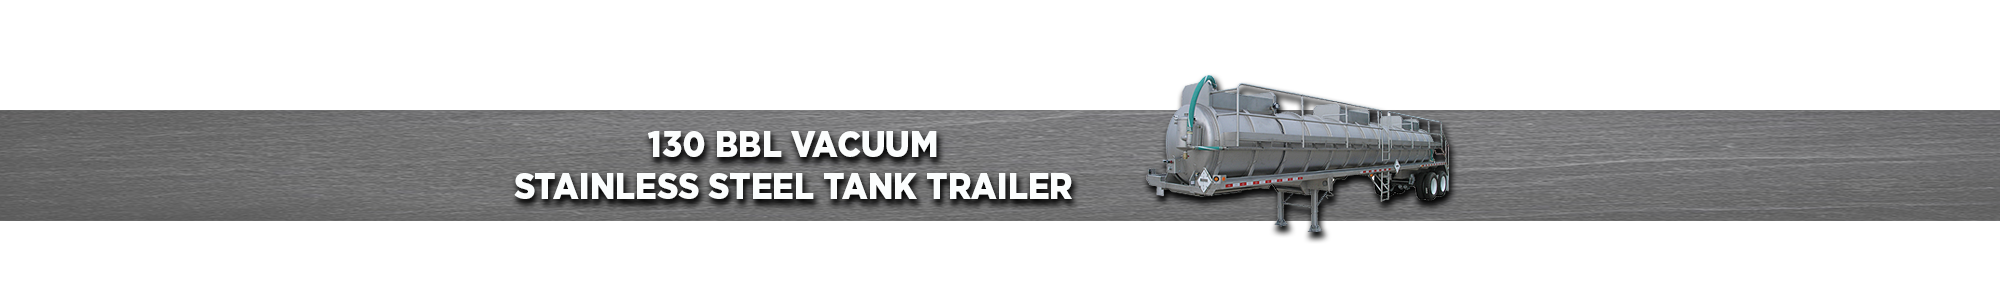 130 bbl vacuum stainless steel trailer